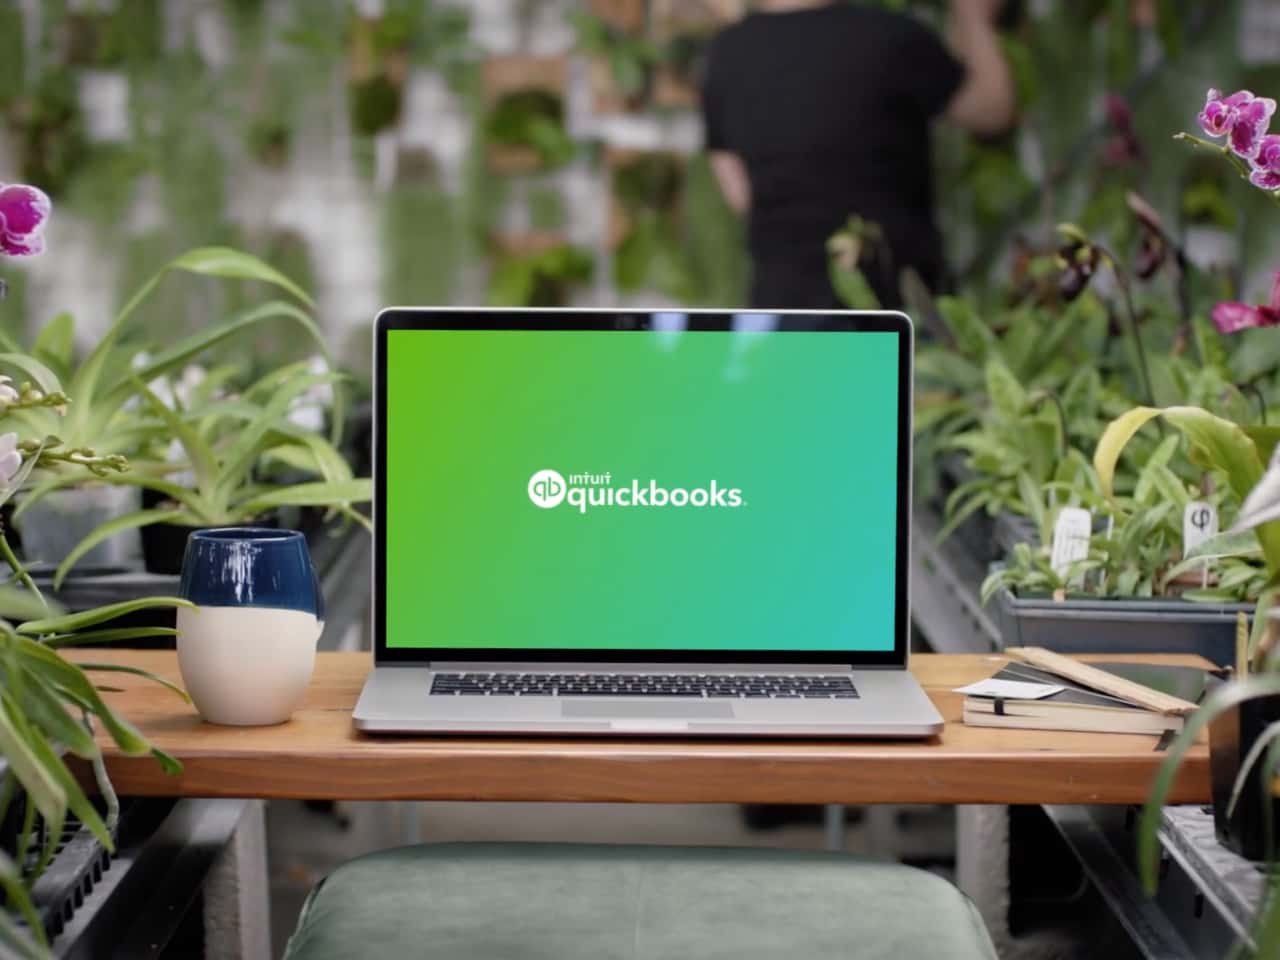 It’s easy to switch over to QuickBooks